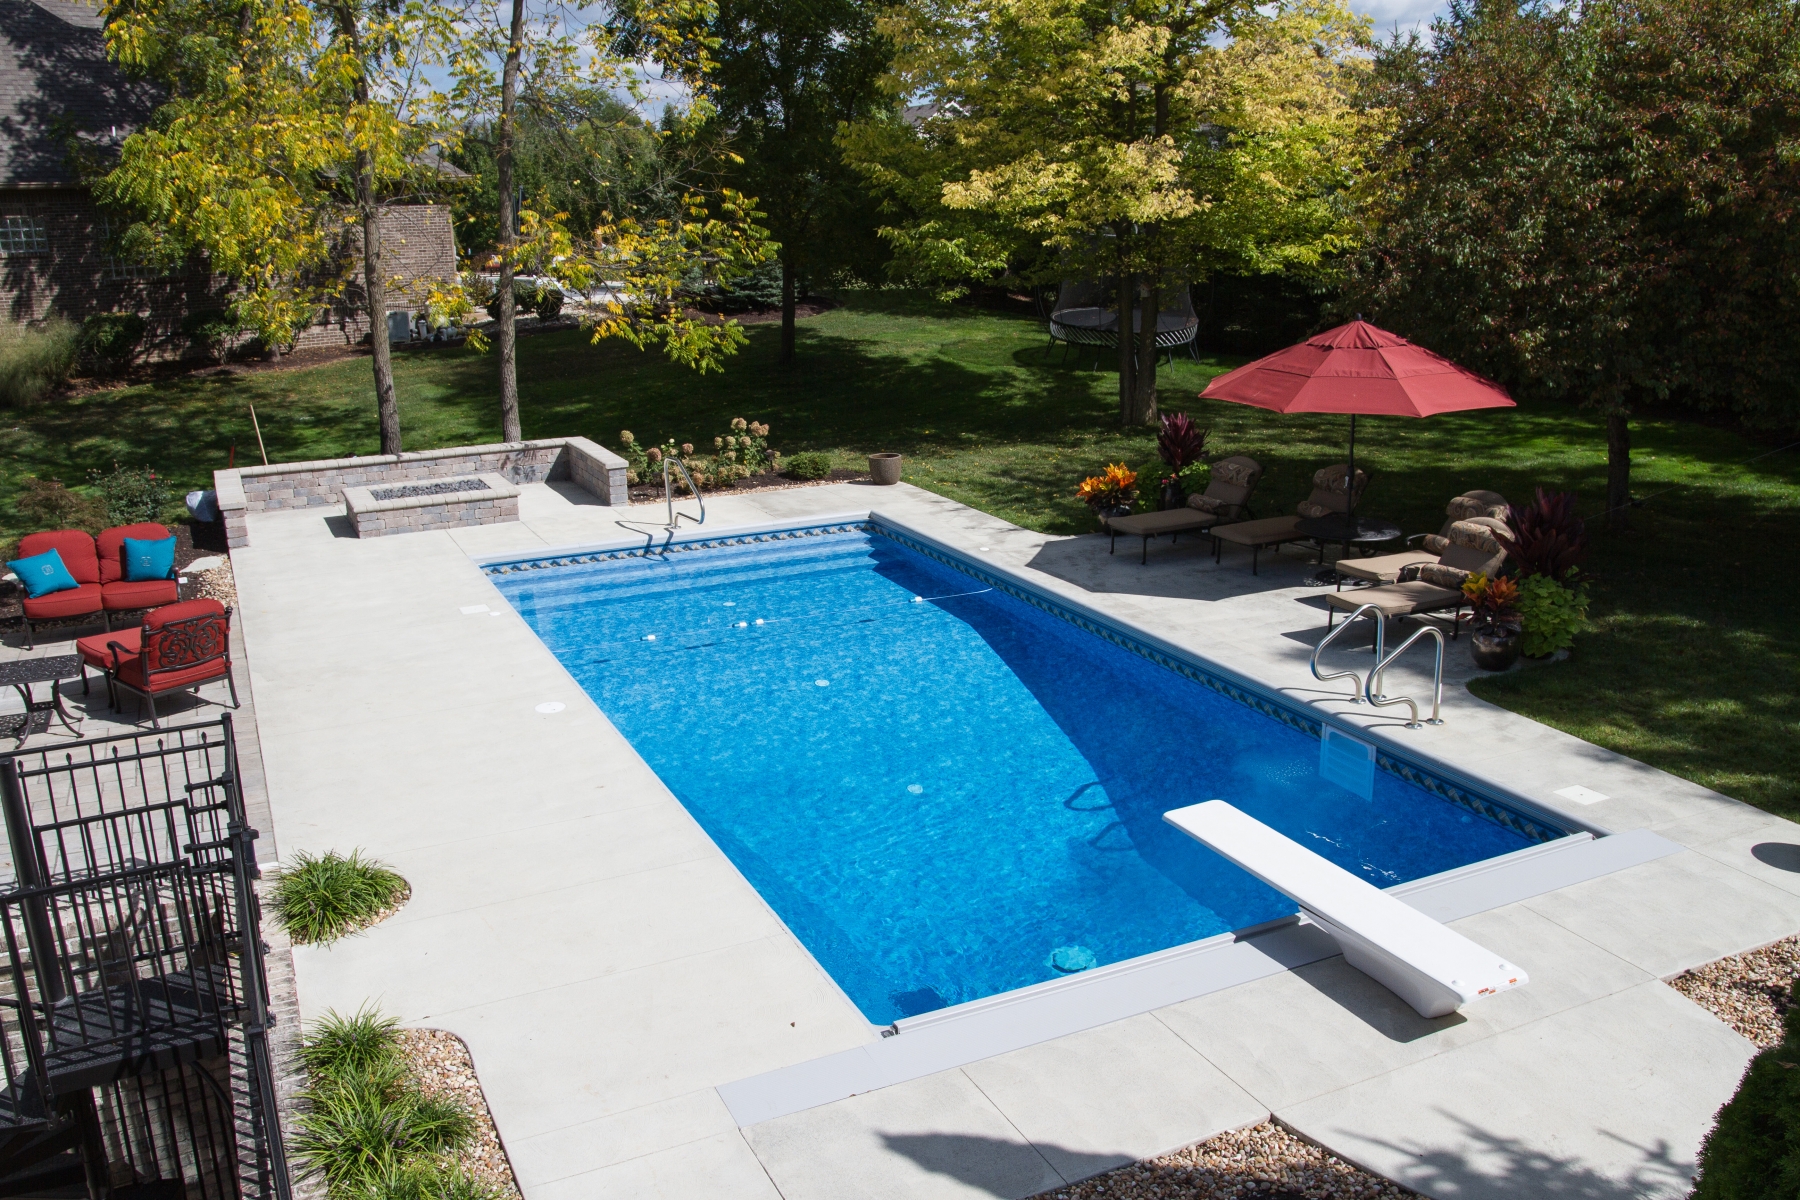 1 Inground Pool Company In Indiana, Pictures Inground Swimming Pools